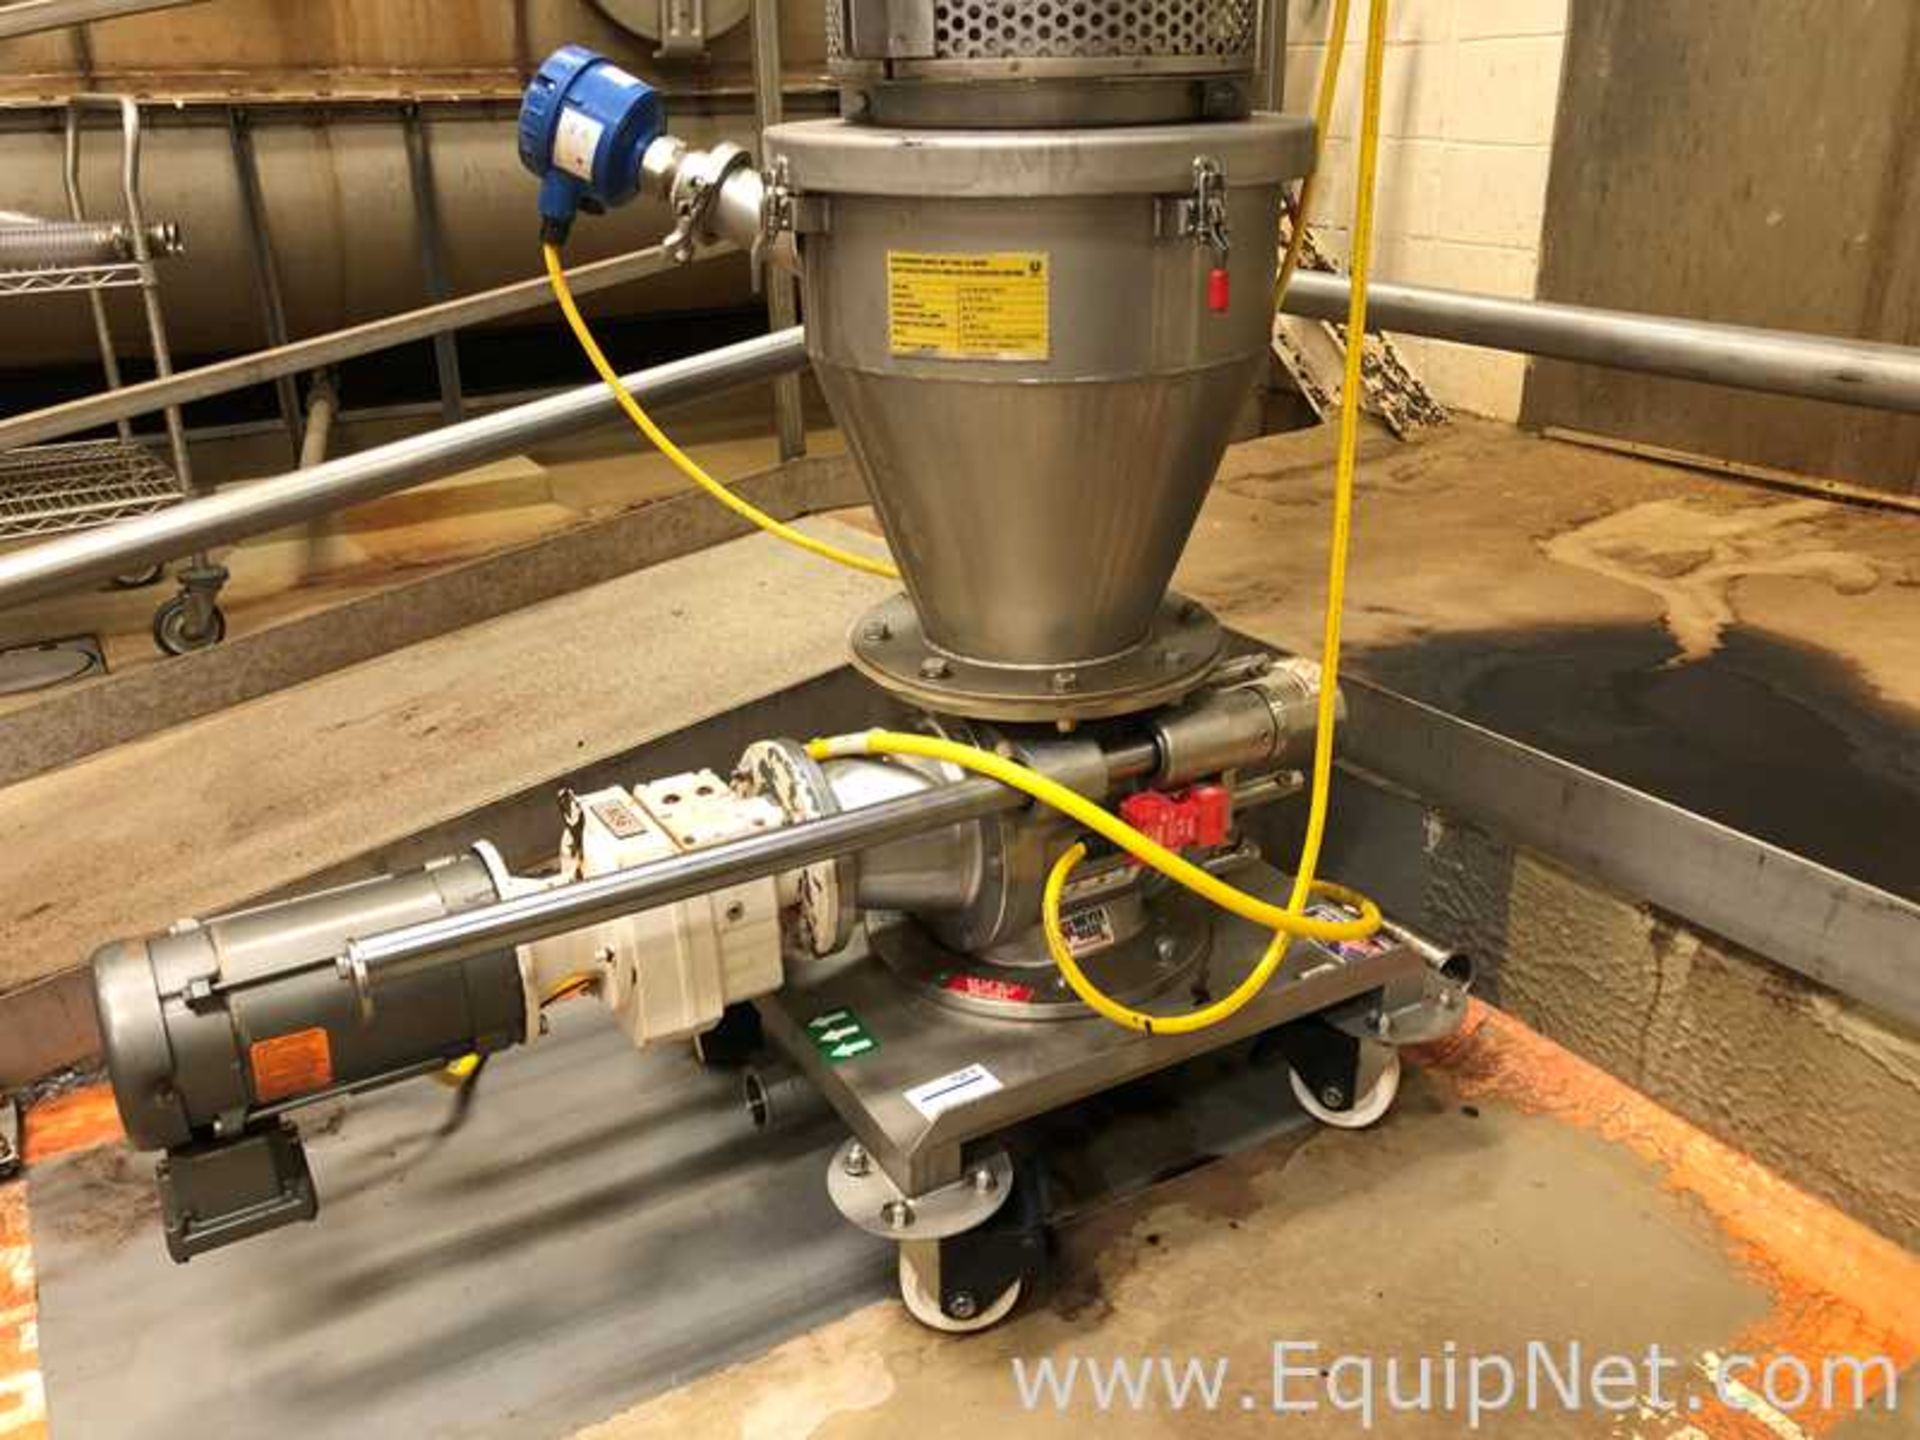 One Vacuum Conveyor System Vac-U-Max With Hopper And One Rotary Valve - Image 2 of 10